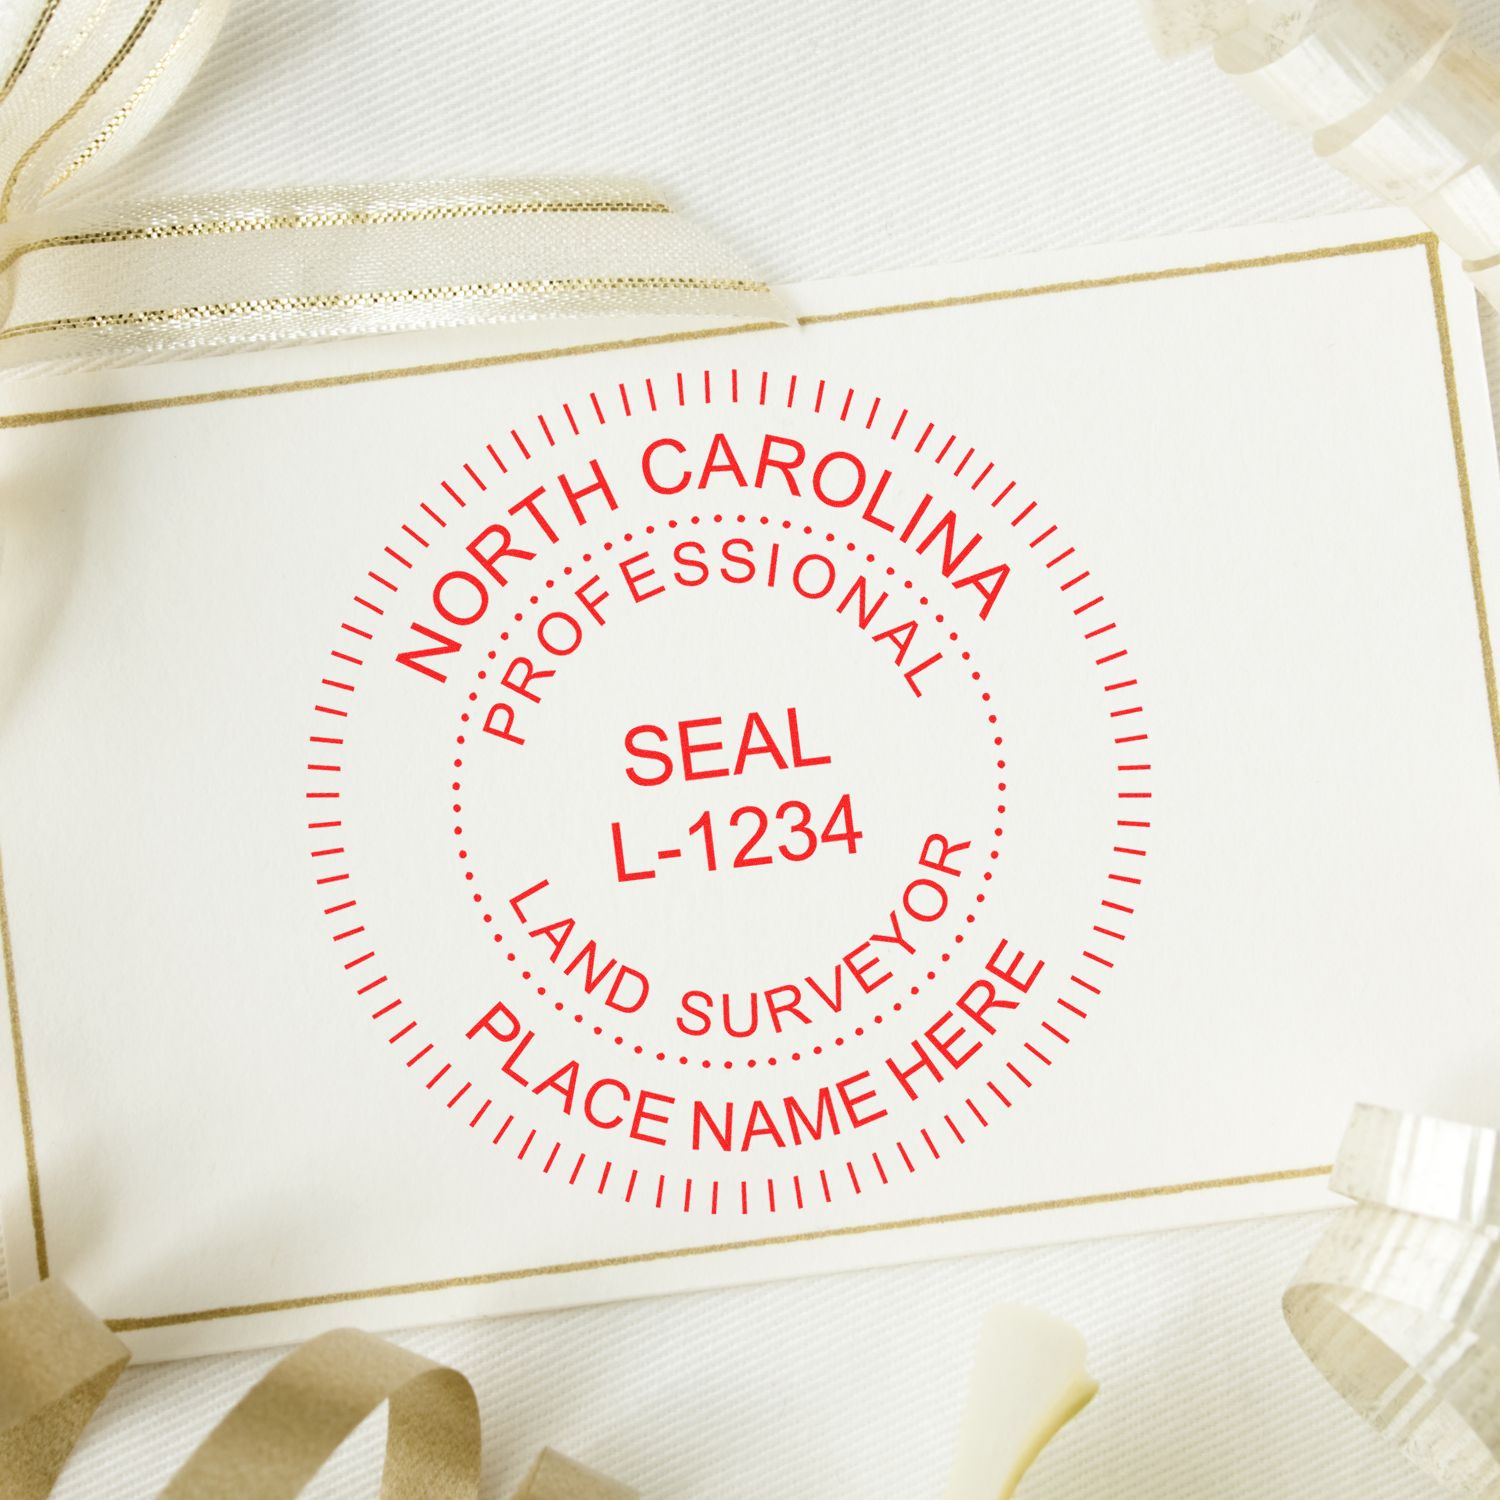 Ensuring Accuracy and Authority: North Carolina Land Surveyor Seal Requirements feature image